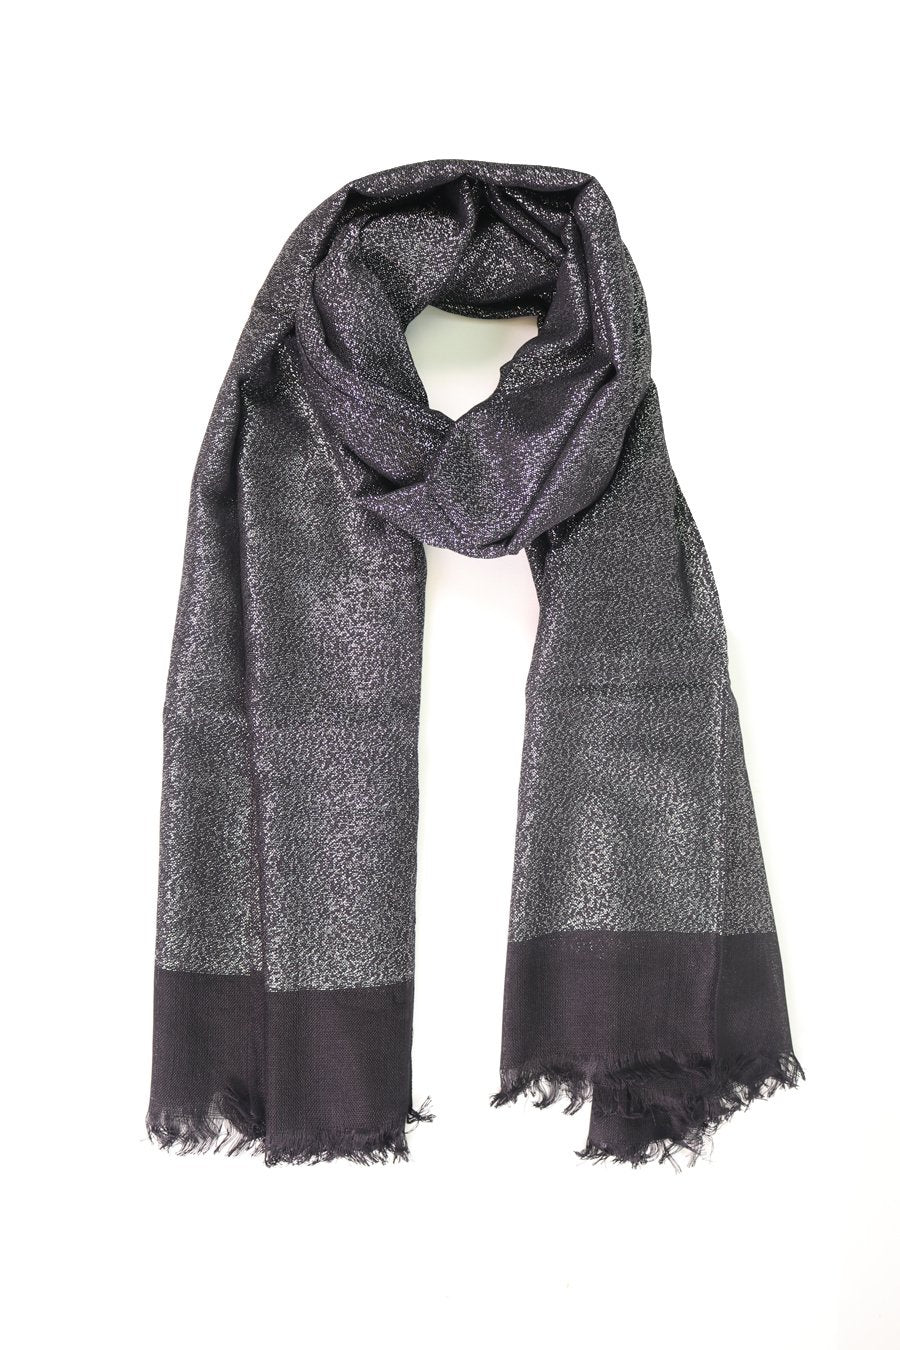 Black And Silver Scarf